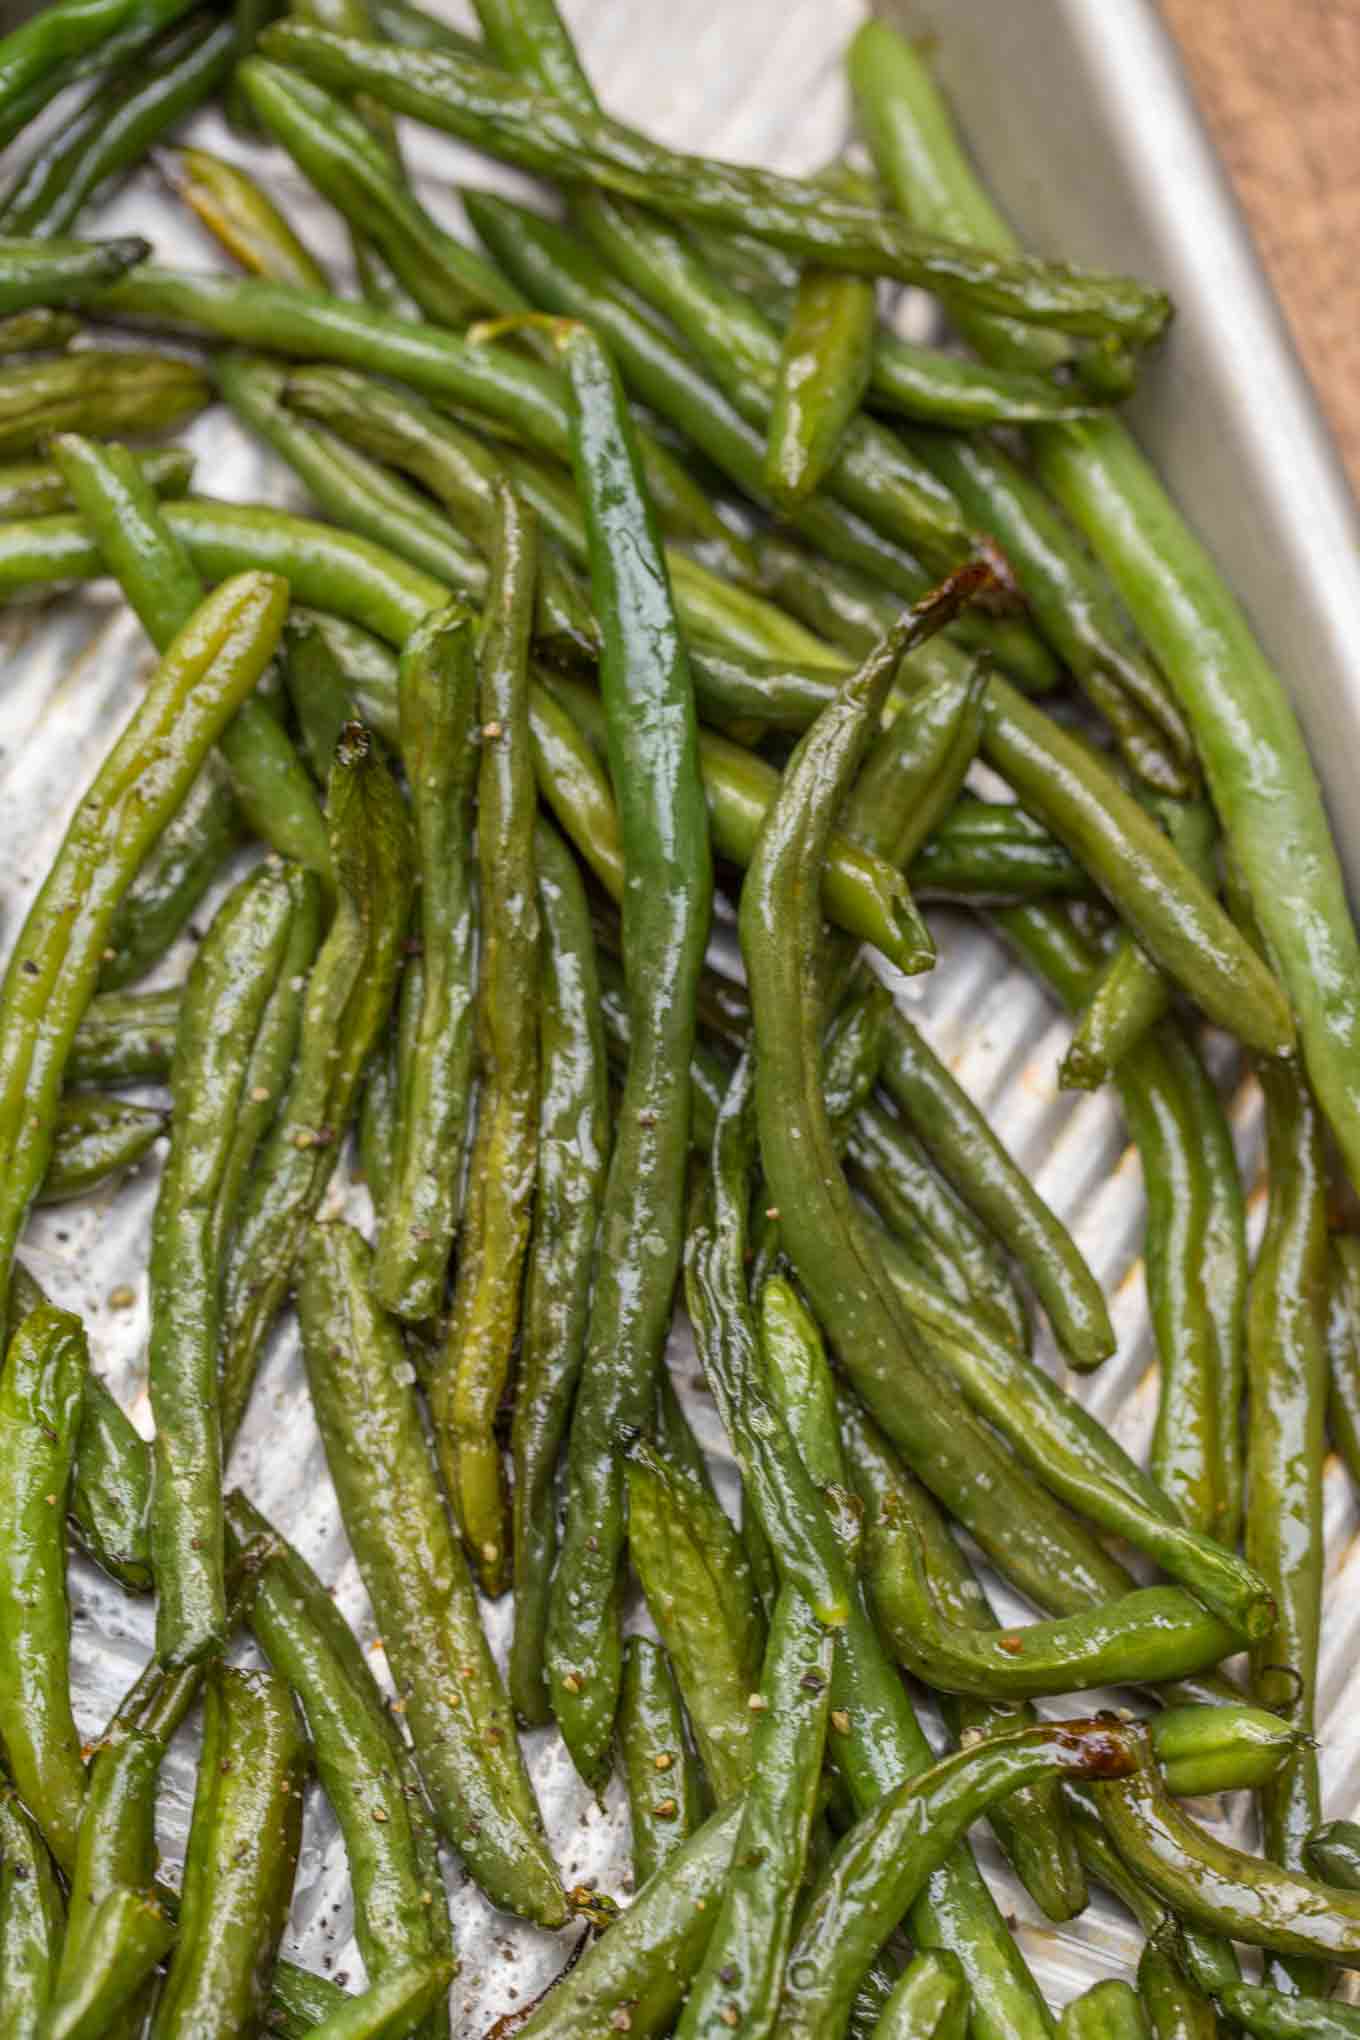 Roasted Green Beans in sheetpan